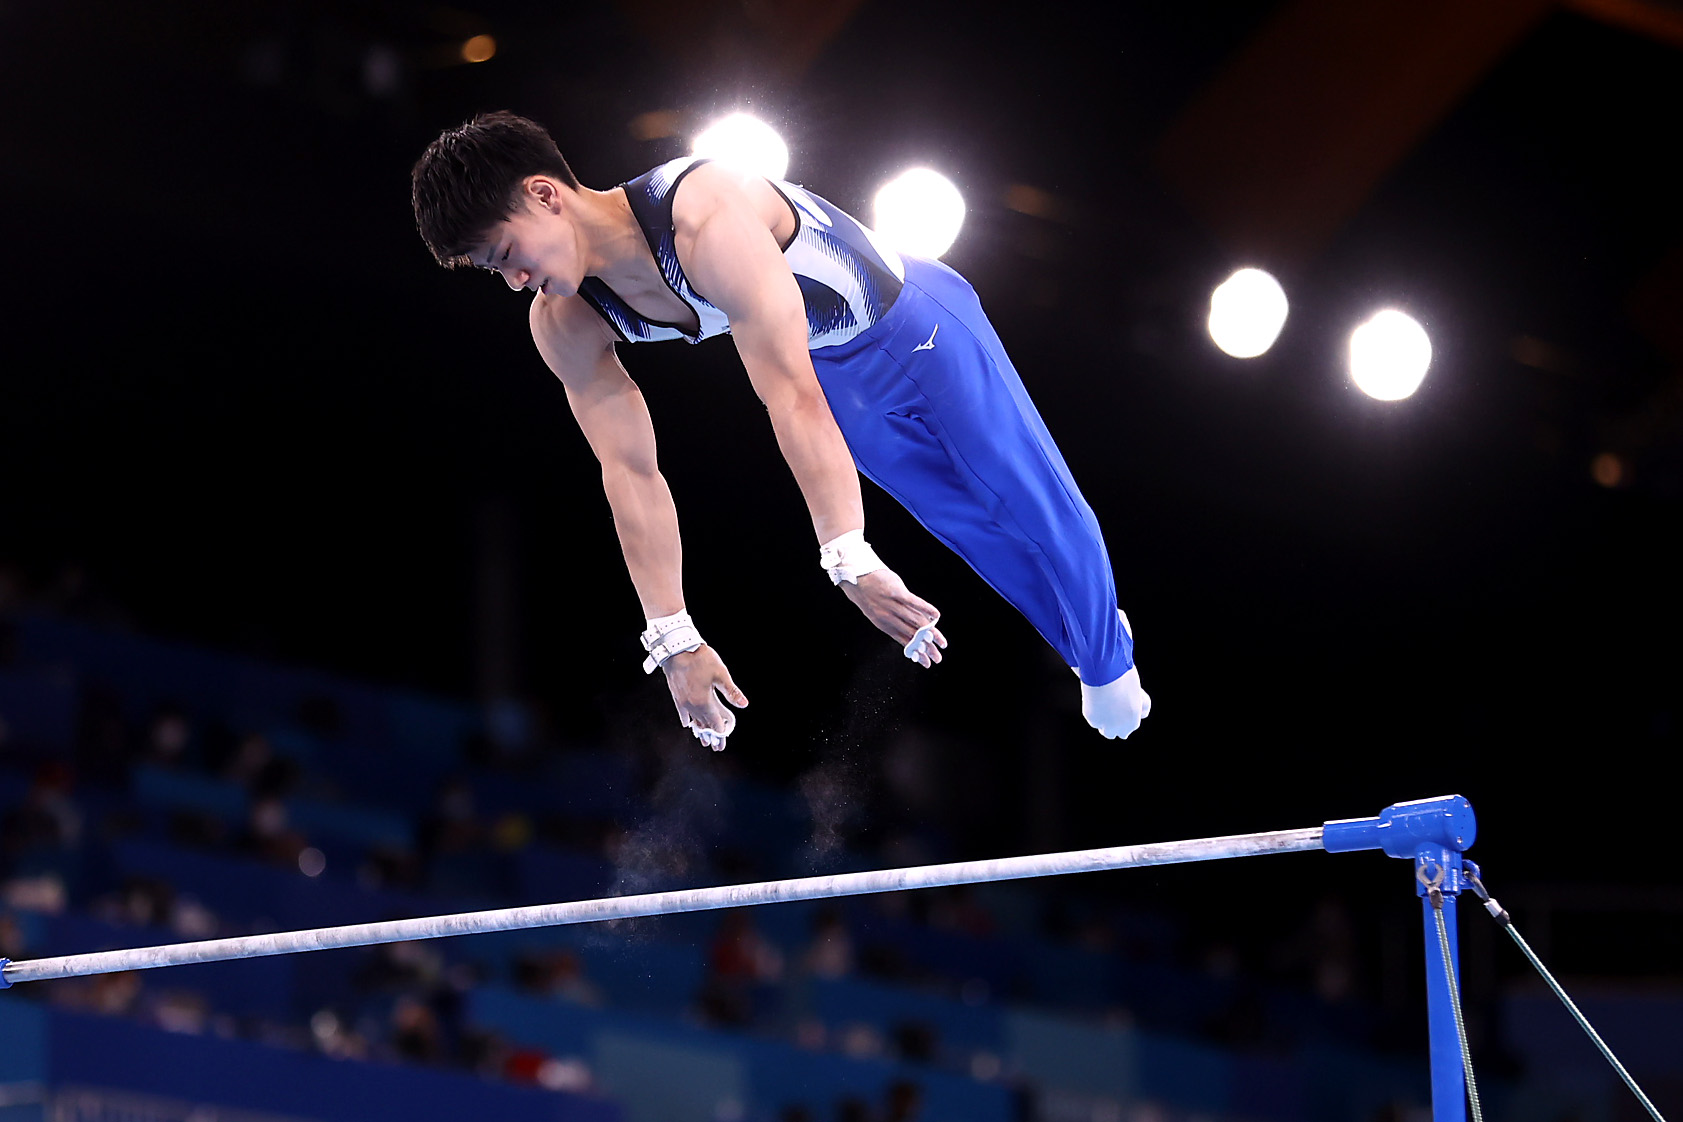 Olympic Men S Gymnastics 21 Horizontal Bar Medal Winners Scores And Results Bleacher Report Latest News Videos And Highlights